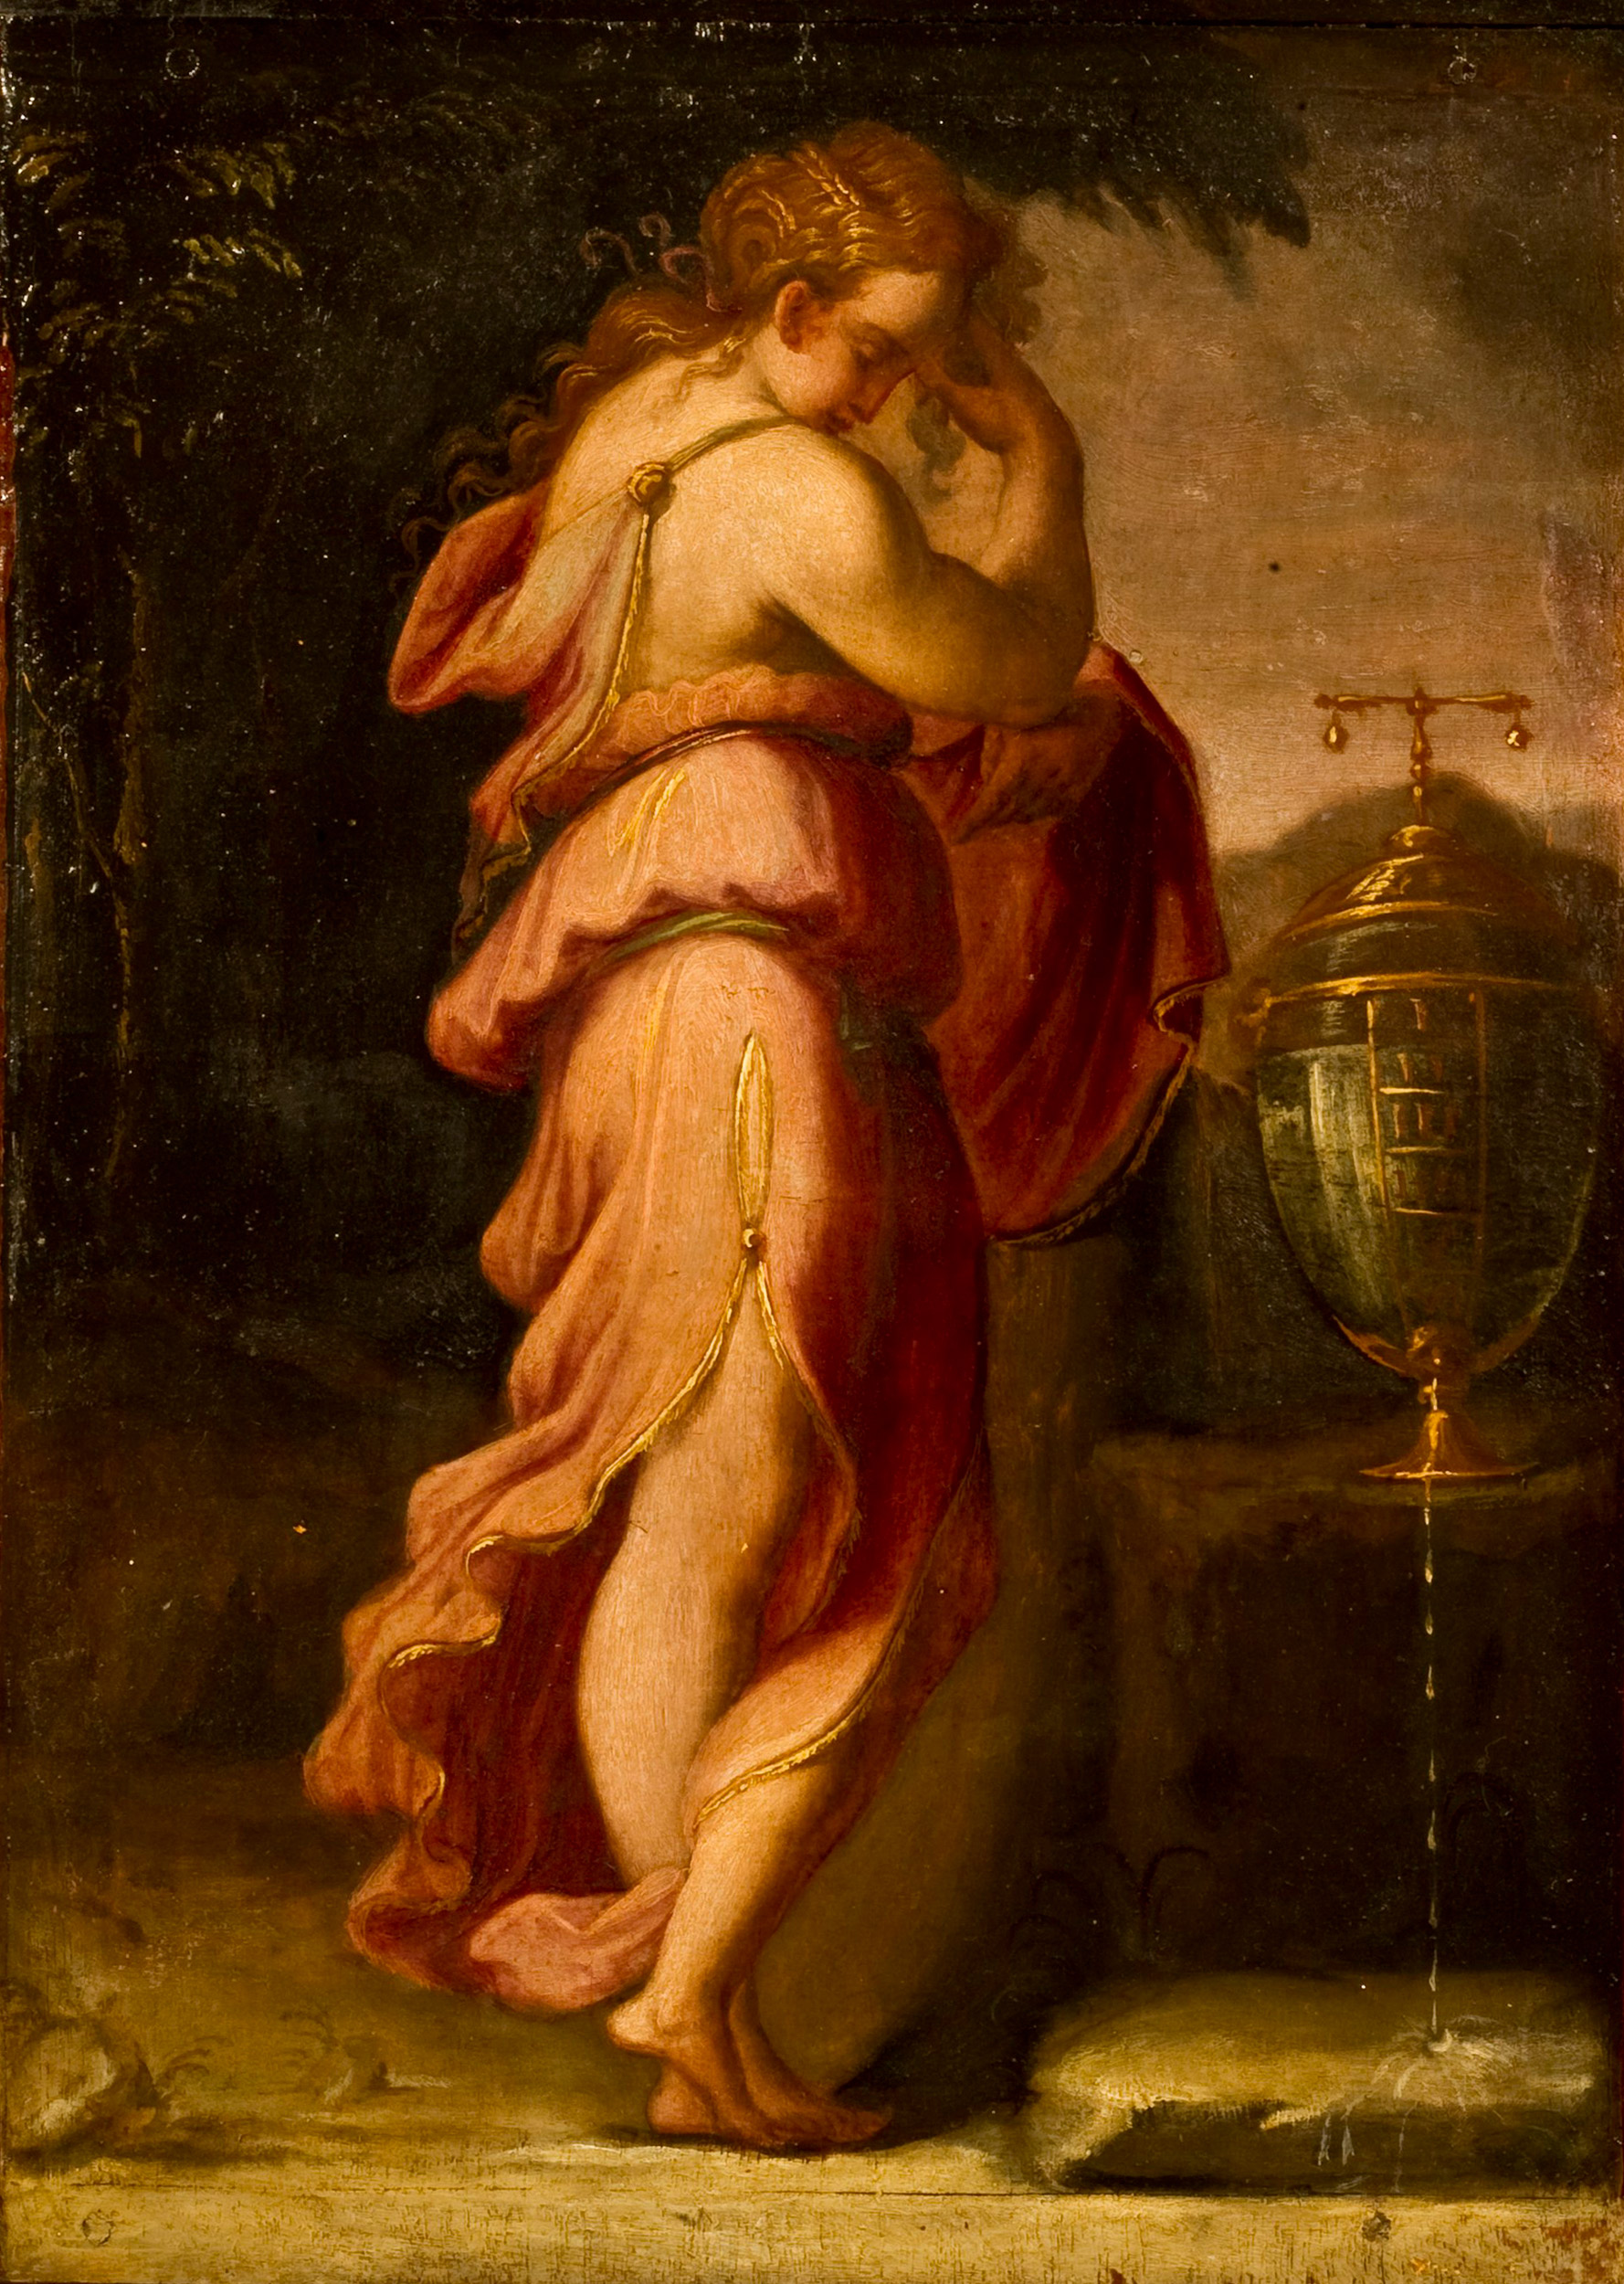 Giorgio Vasari and the Allegory of Patience